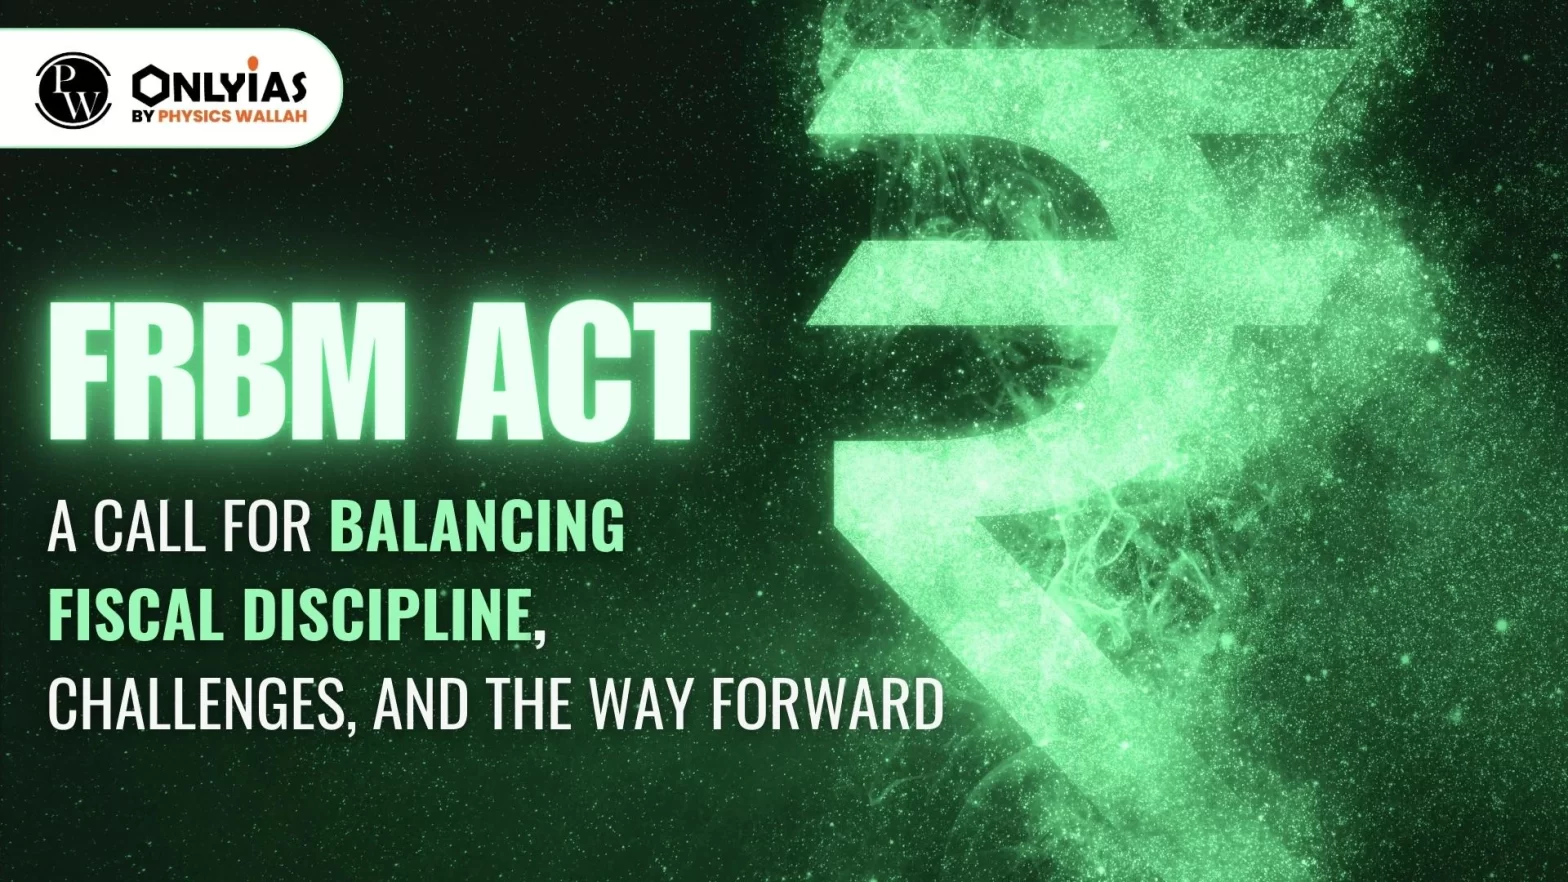 FRBM Act – A Call For Balancing Fiscal Discipline, Challenges and the Way Forward